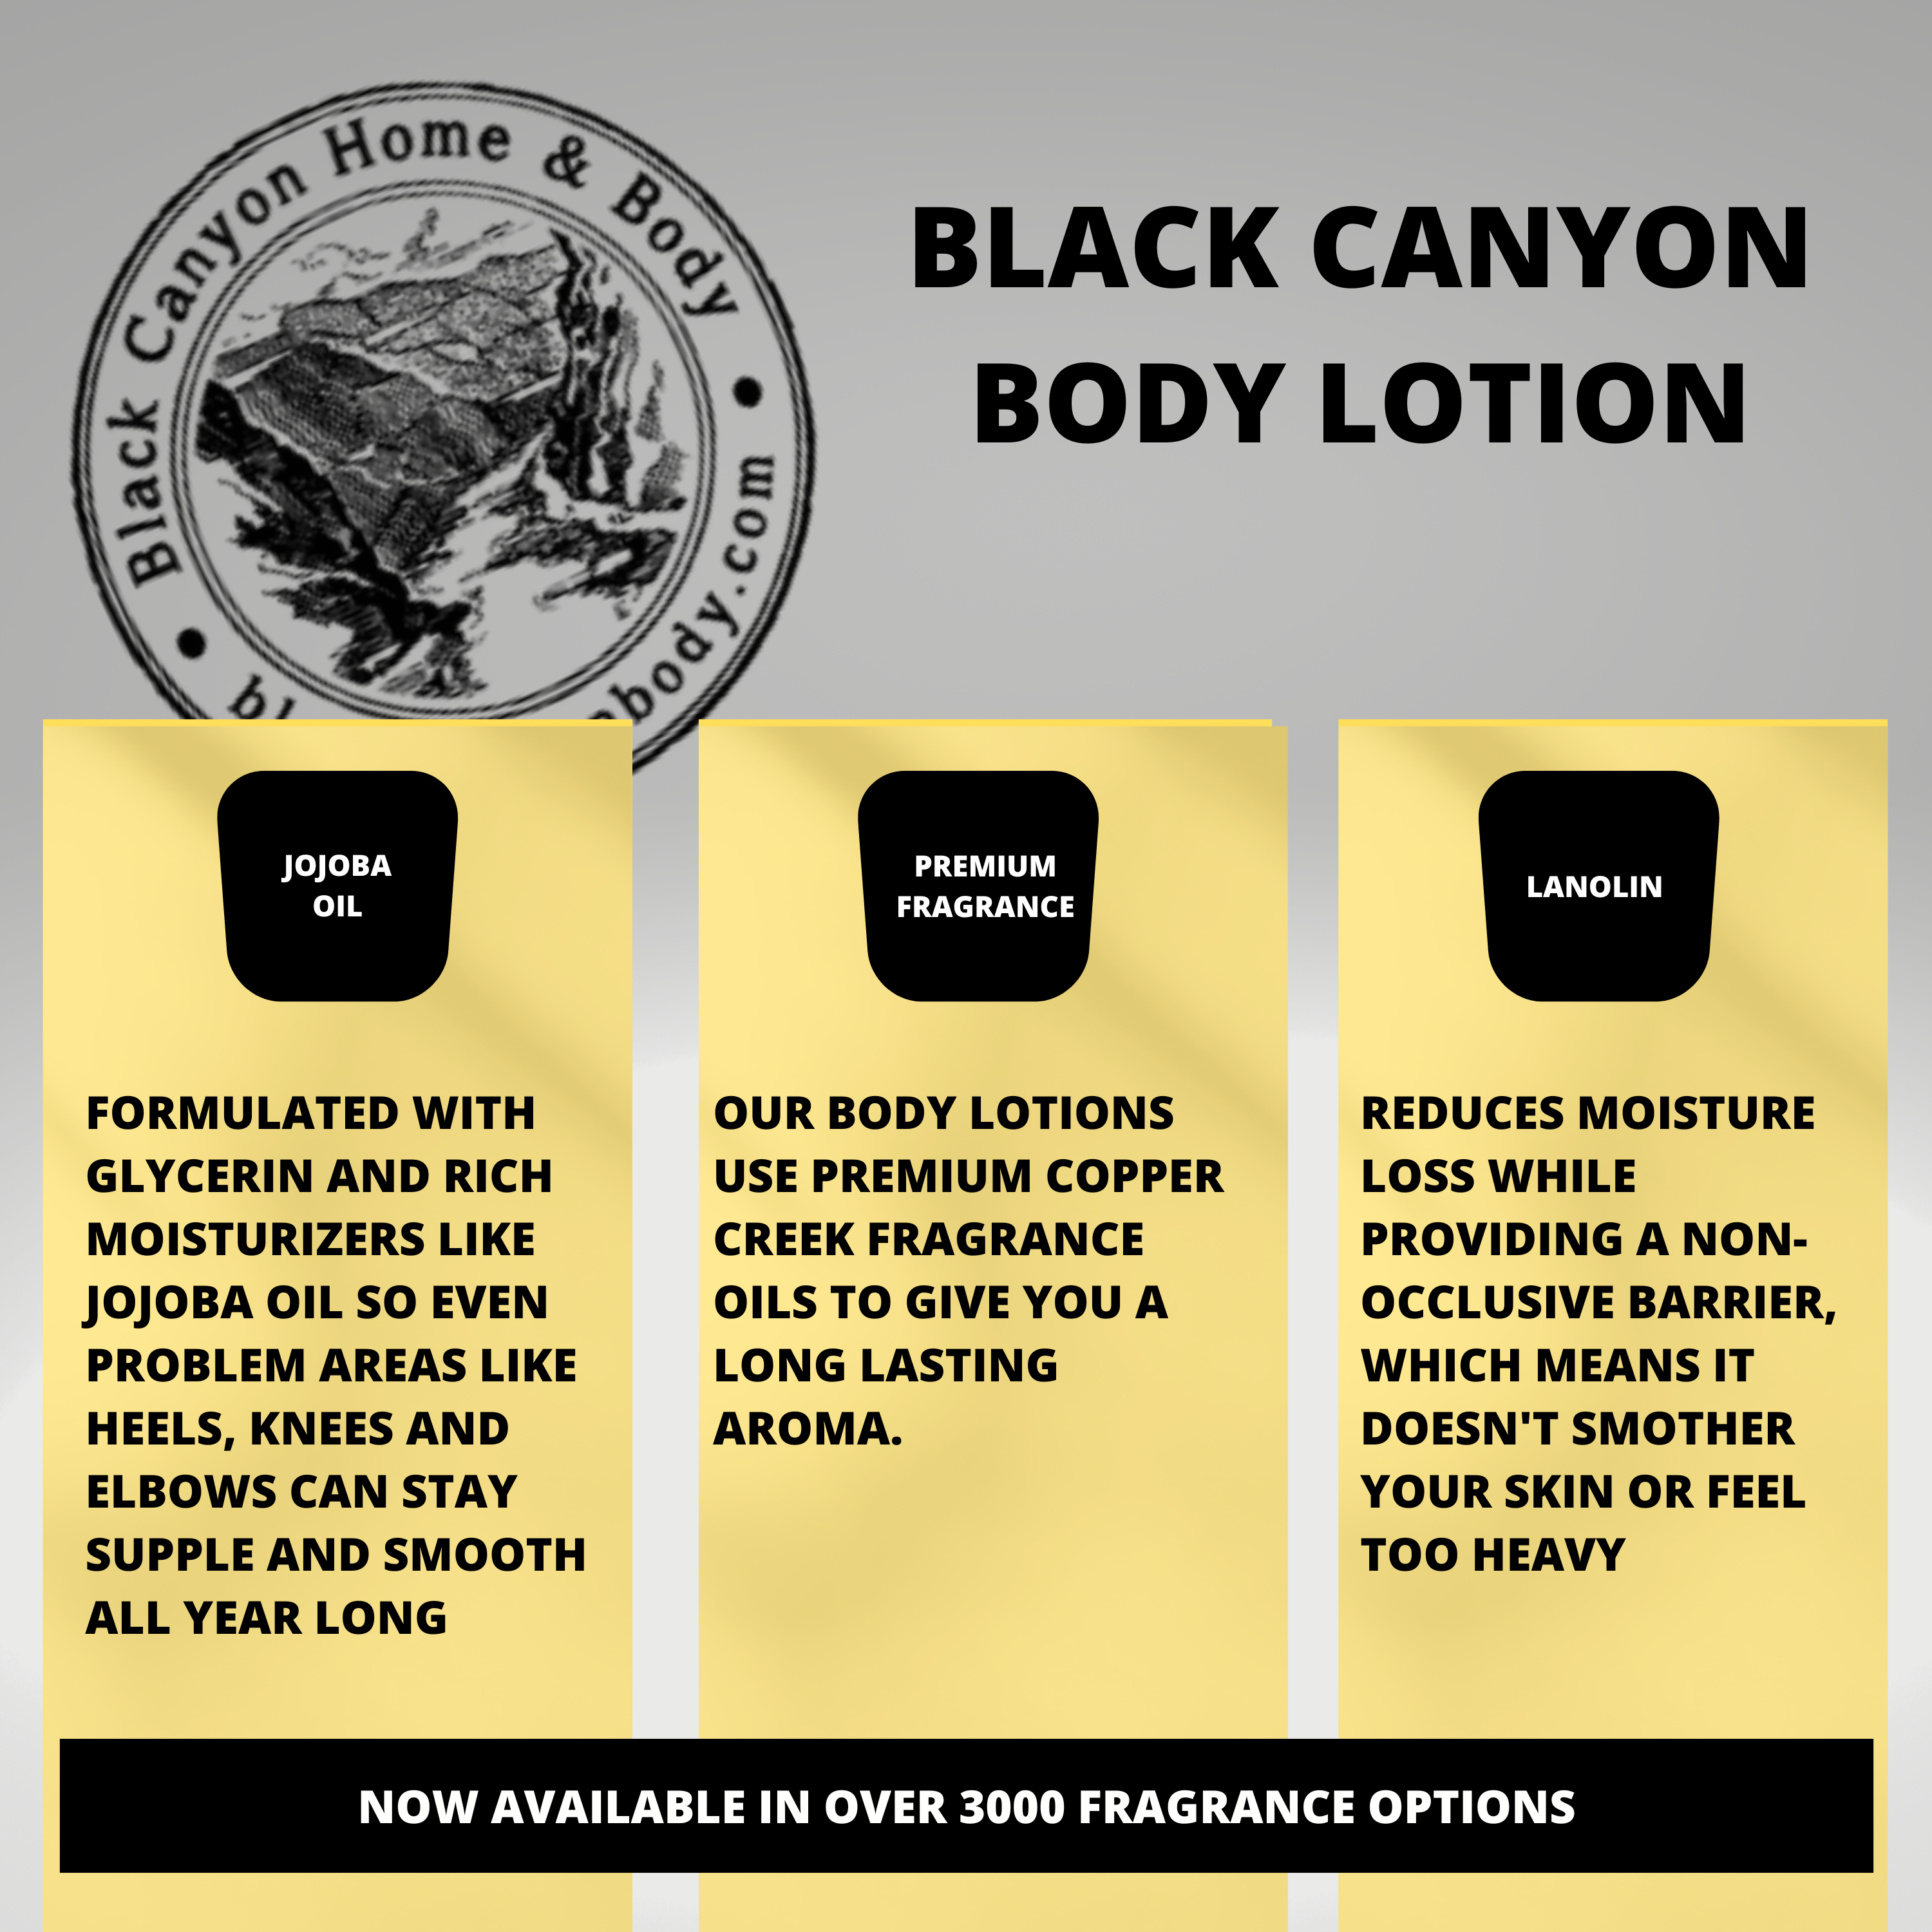 Black Canyon Cranapple Scented Luxury Body Lotion with Lanolin and Jojoba Oil